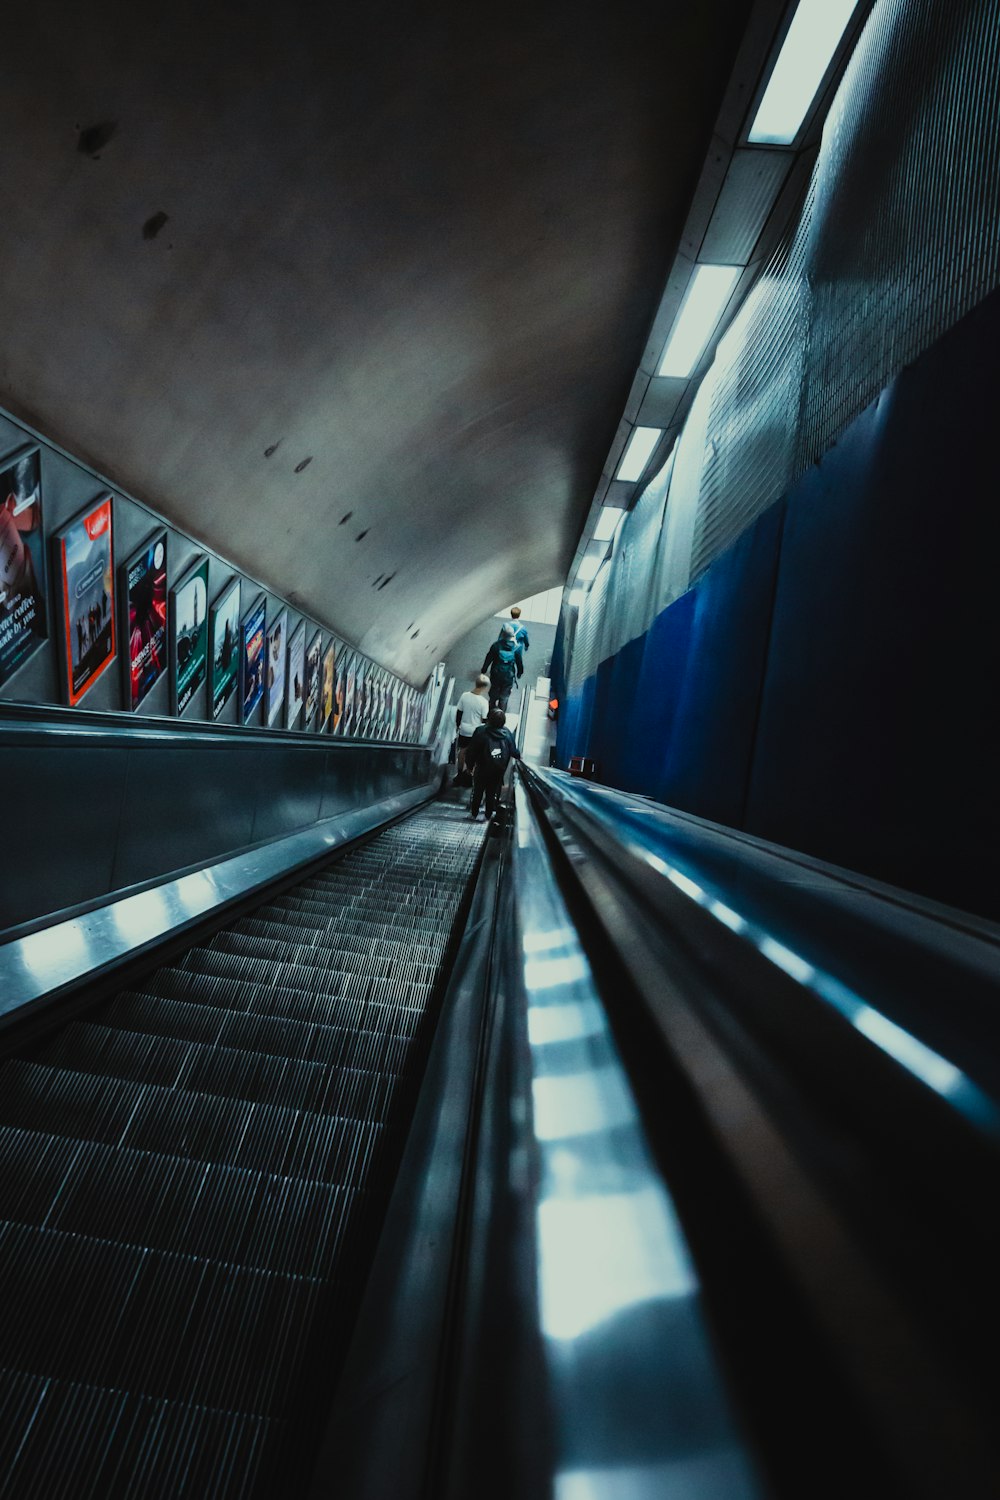 a person riding an escalator in a subway station